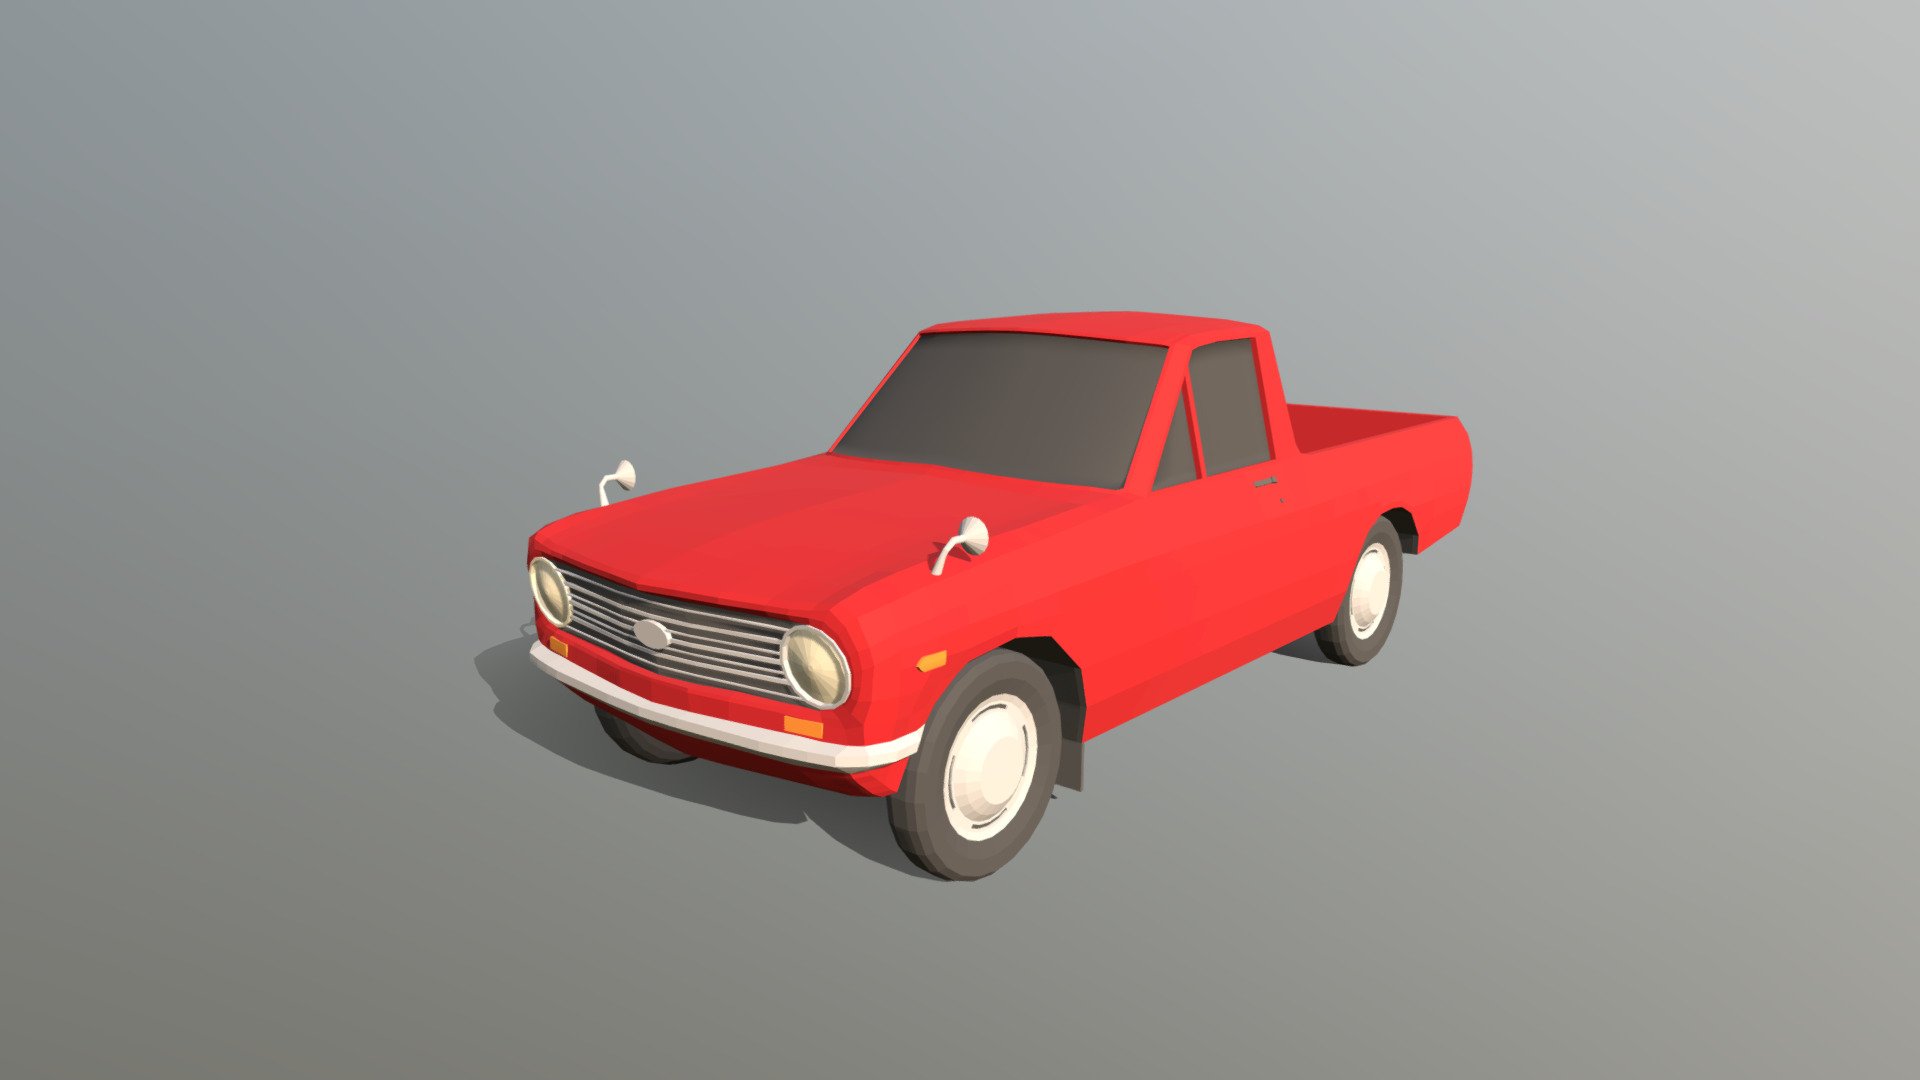 This is a low poly 3d model of a Datsun 1000 Pickup B20 1996 car. The low poly car was modelled and prepared for low-poly style renderings, background, general CG visualization presented as a mesh with quads only.

Verts : 5.675 Faces: 5.534

The model have simple materials with diffuse colors.

No ring, maps and no UVW mapping is available.

The original file was created in blender. You will receive a 3DS, OBJ, FBX, blend, DAE, Stl.

All preview images were rendered with Blender Cycles. Product is ready to render out-of-the-box. Please note that the lights, cameras, and background is only included in the .blend file. The model is clean and alone in the other provided files, centred at origin and has real-world scale 3d model